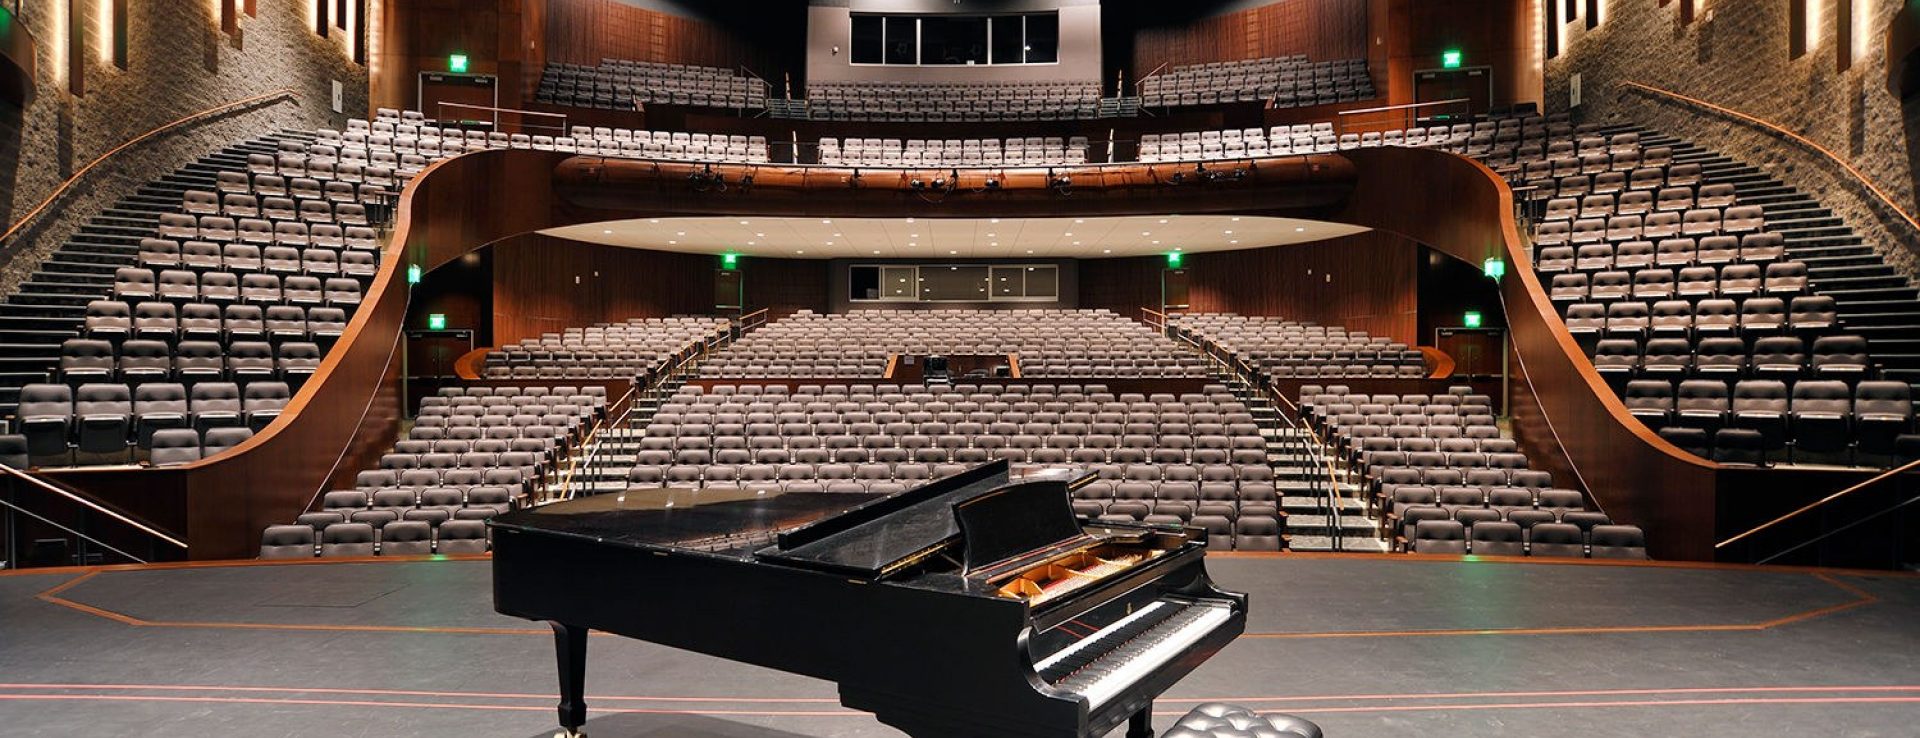 Performing Arts Center at Kent State University Tuscarawas | Ohio's Amish  Country